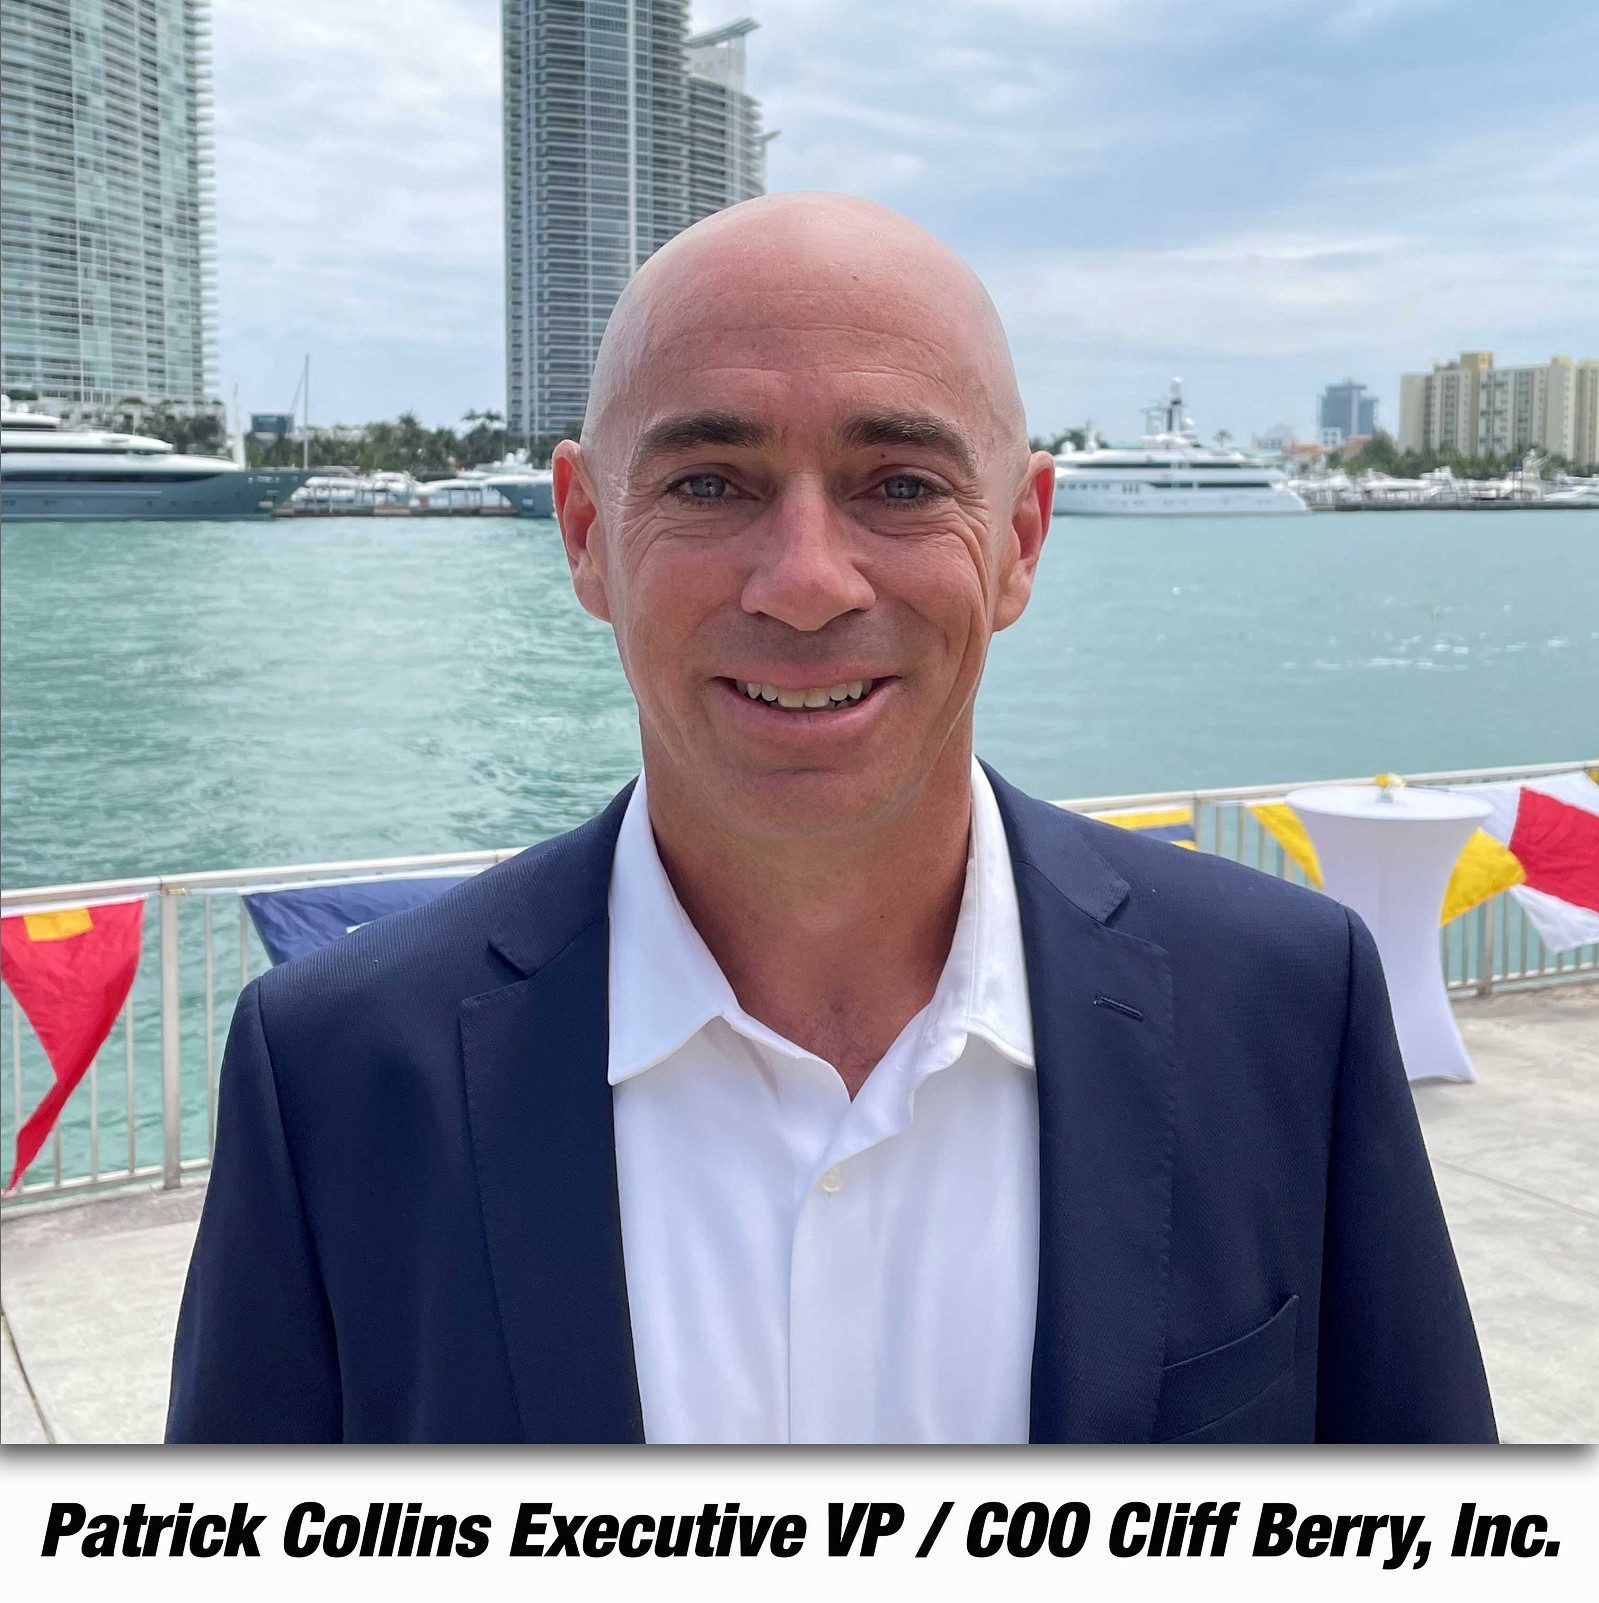  Cliff Berry Inc. (CBI) names Patrick Collins Executive Vice President and Chief Operating Officer 